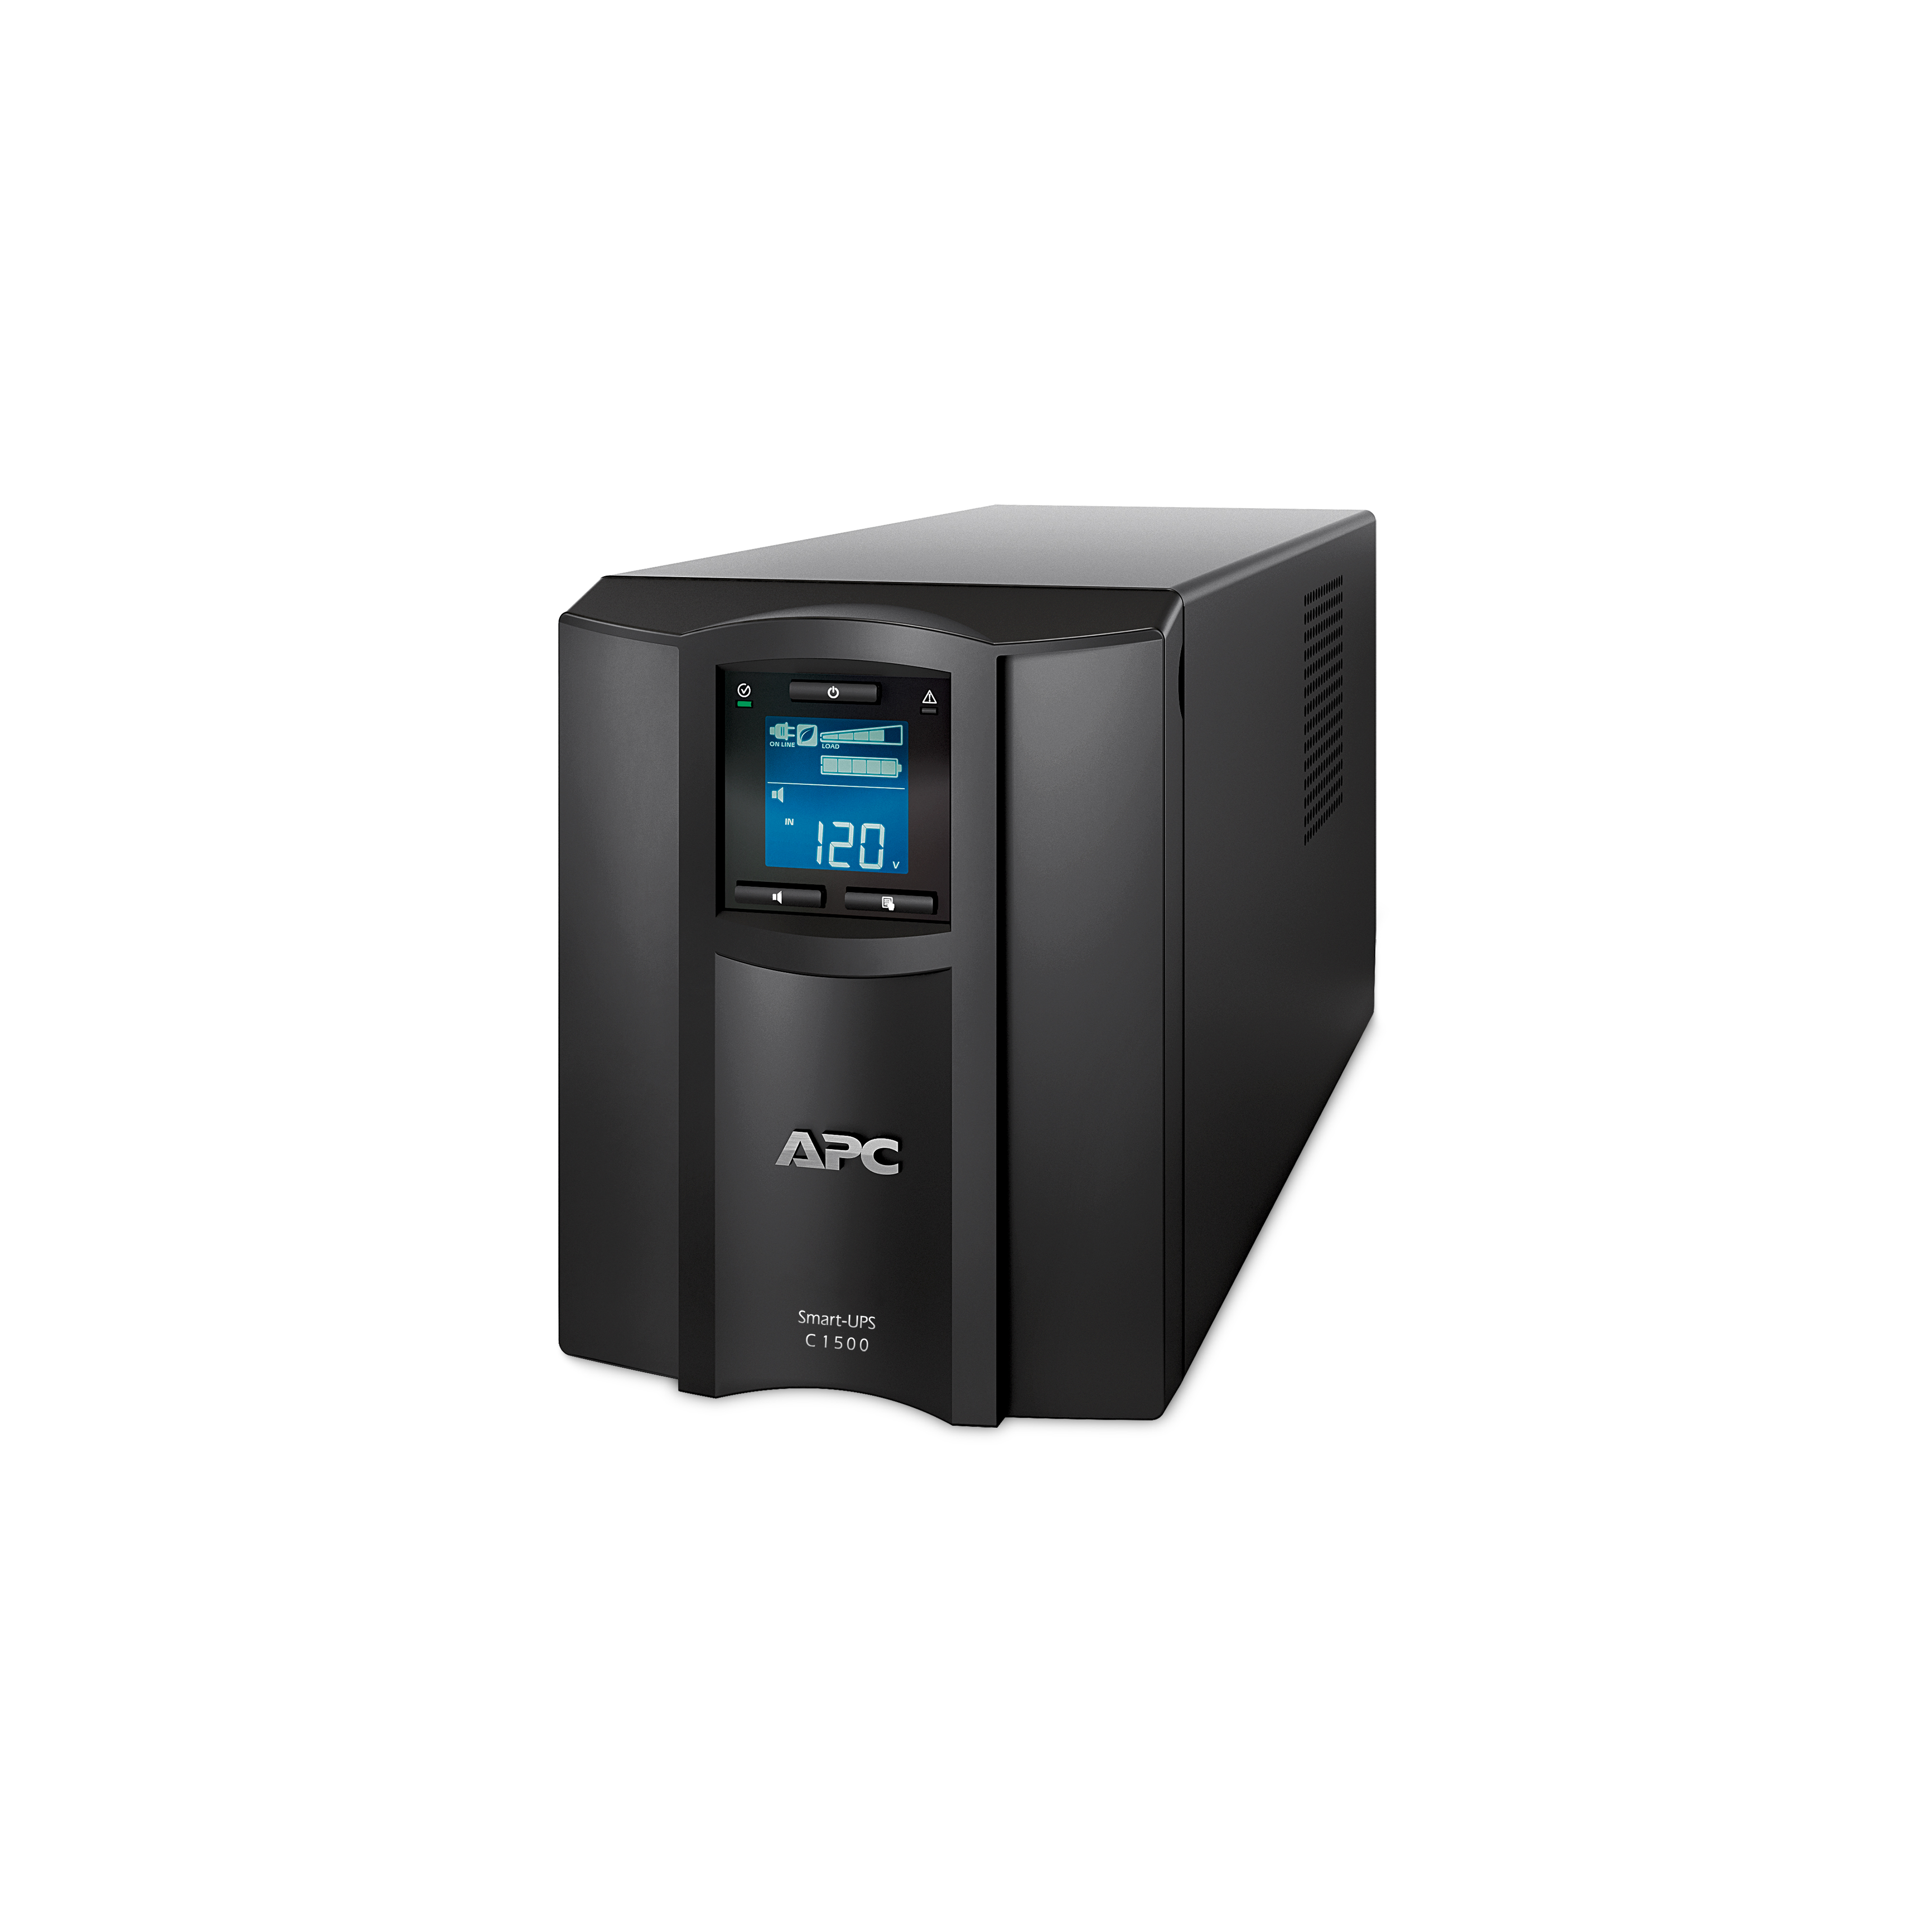 APC Smart-UPS C, Line Interactive, 1440VA, Tower, 120V, 8x NEMA 5-15R outlets, SmartConnect port, USB and Serial communication, AVR, Graphic LCD